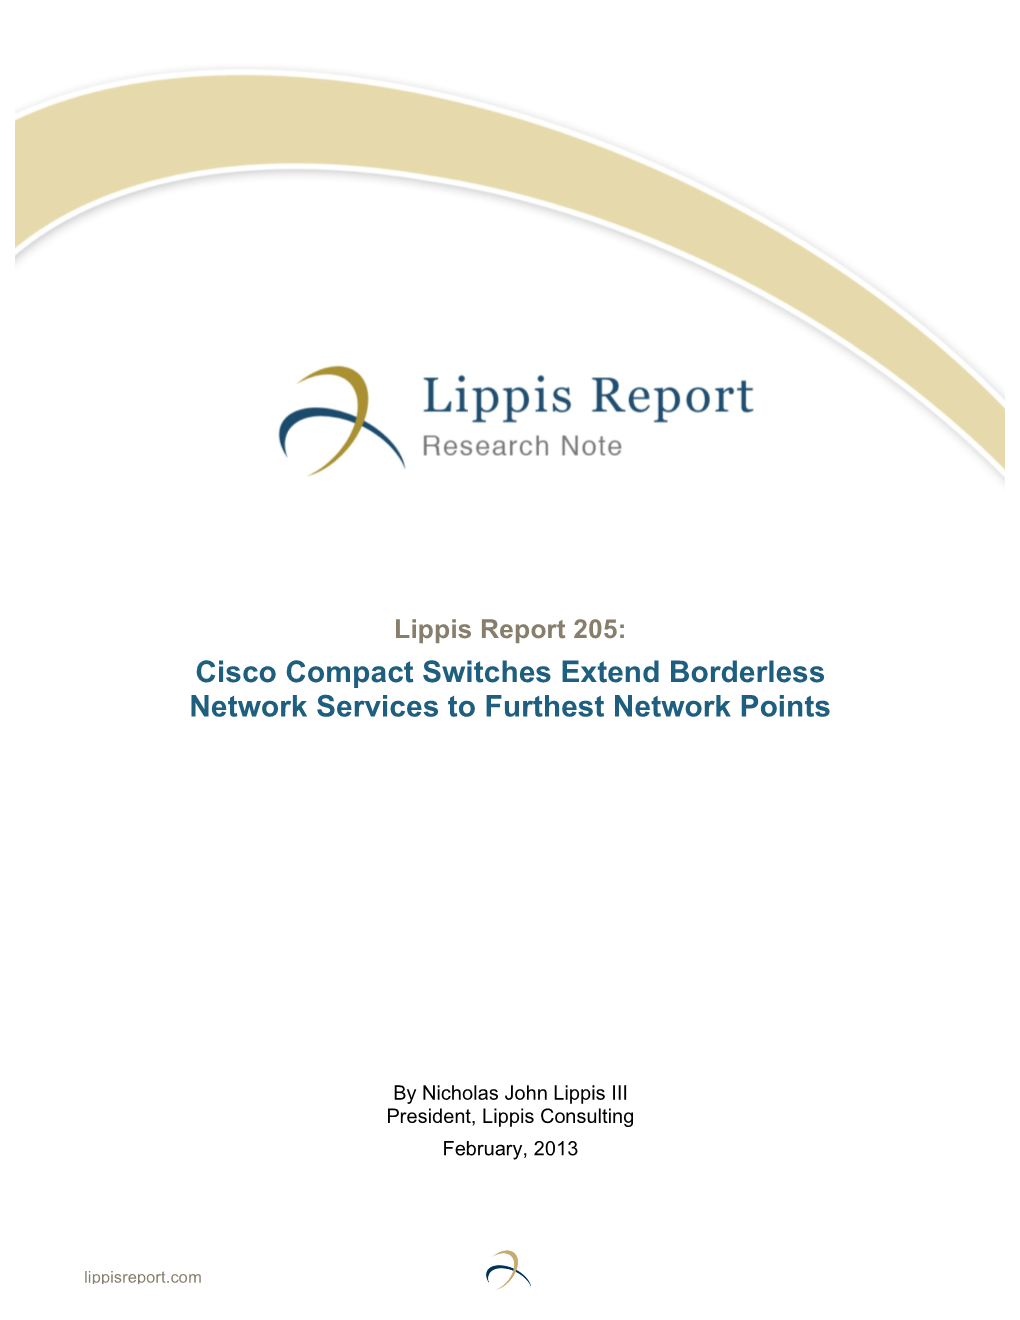 Cisco Compact Switches Extend Network Services White Paper